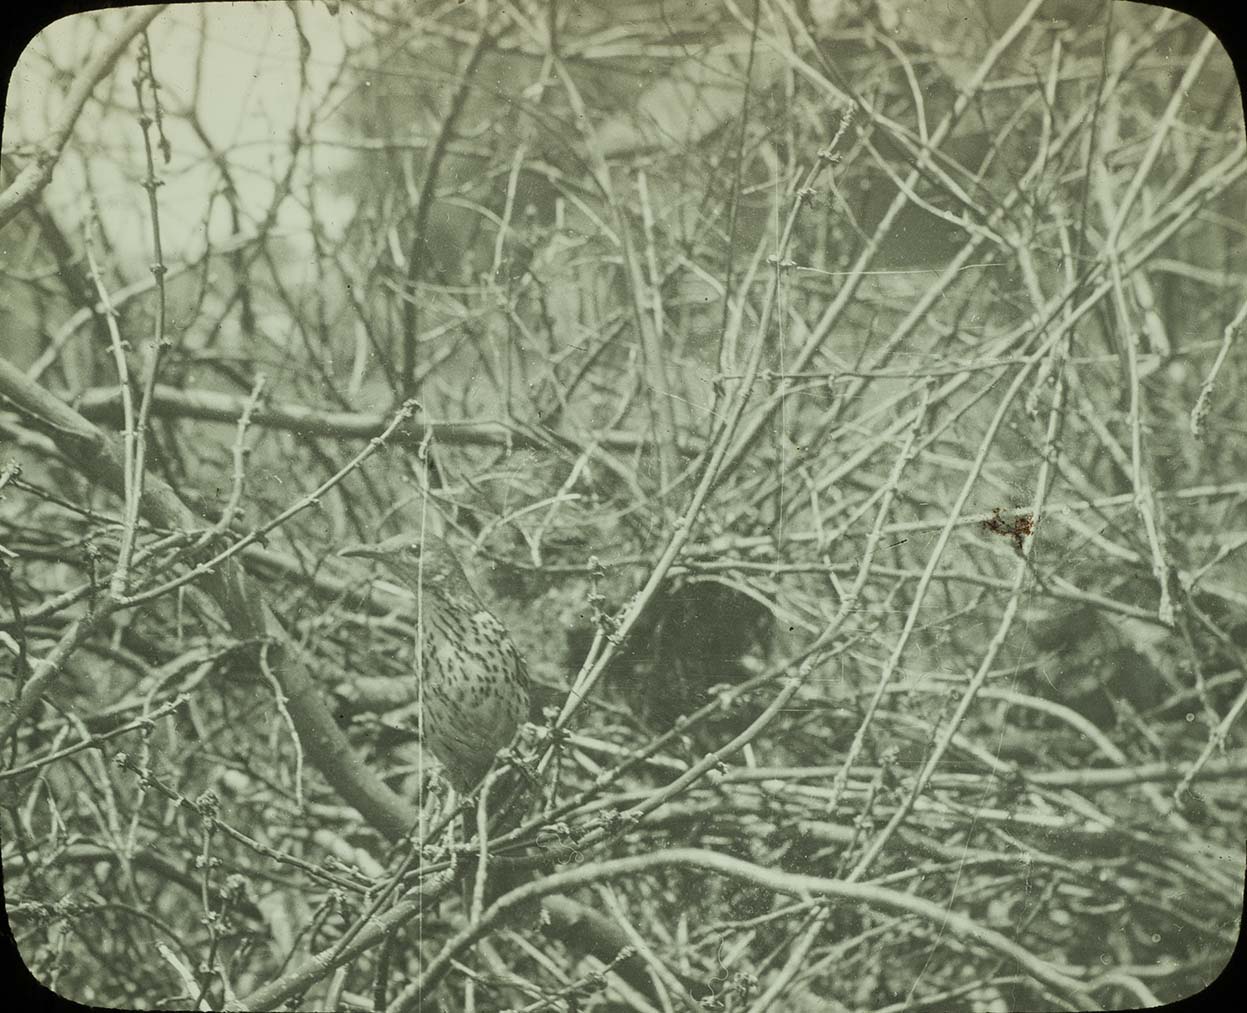 Lantern slide and photograph of a Brown Thrasher near a nest